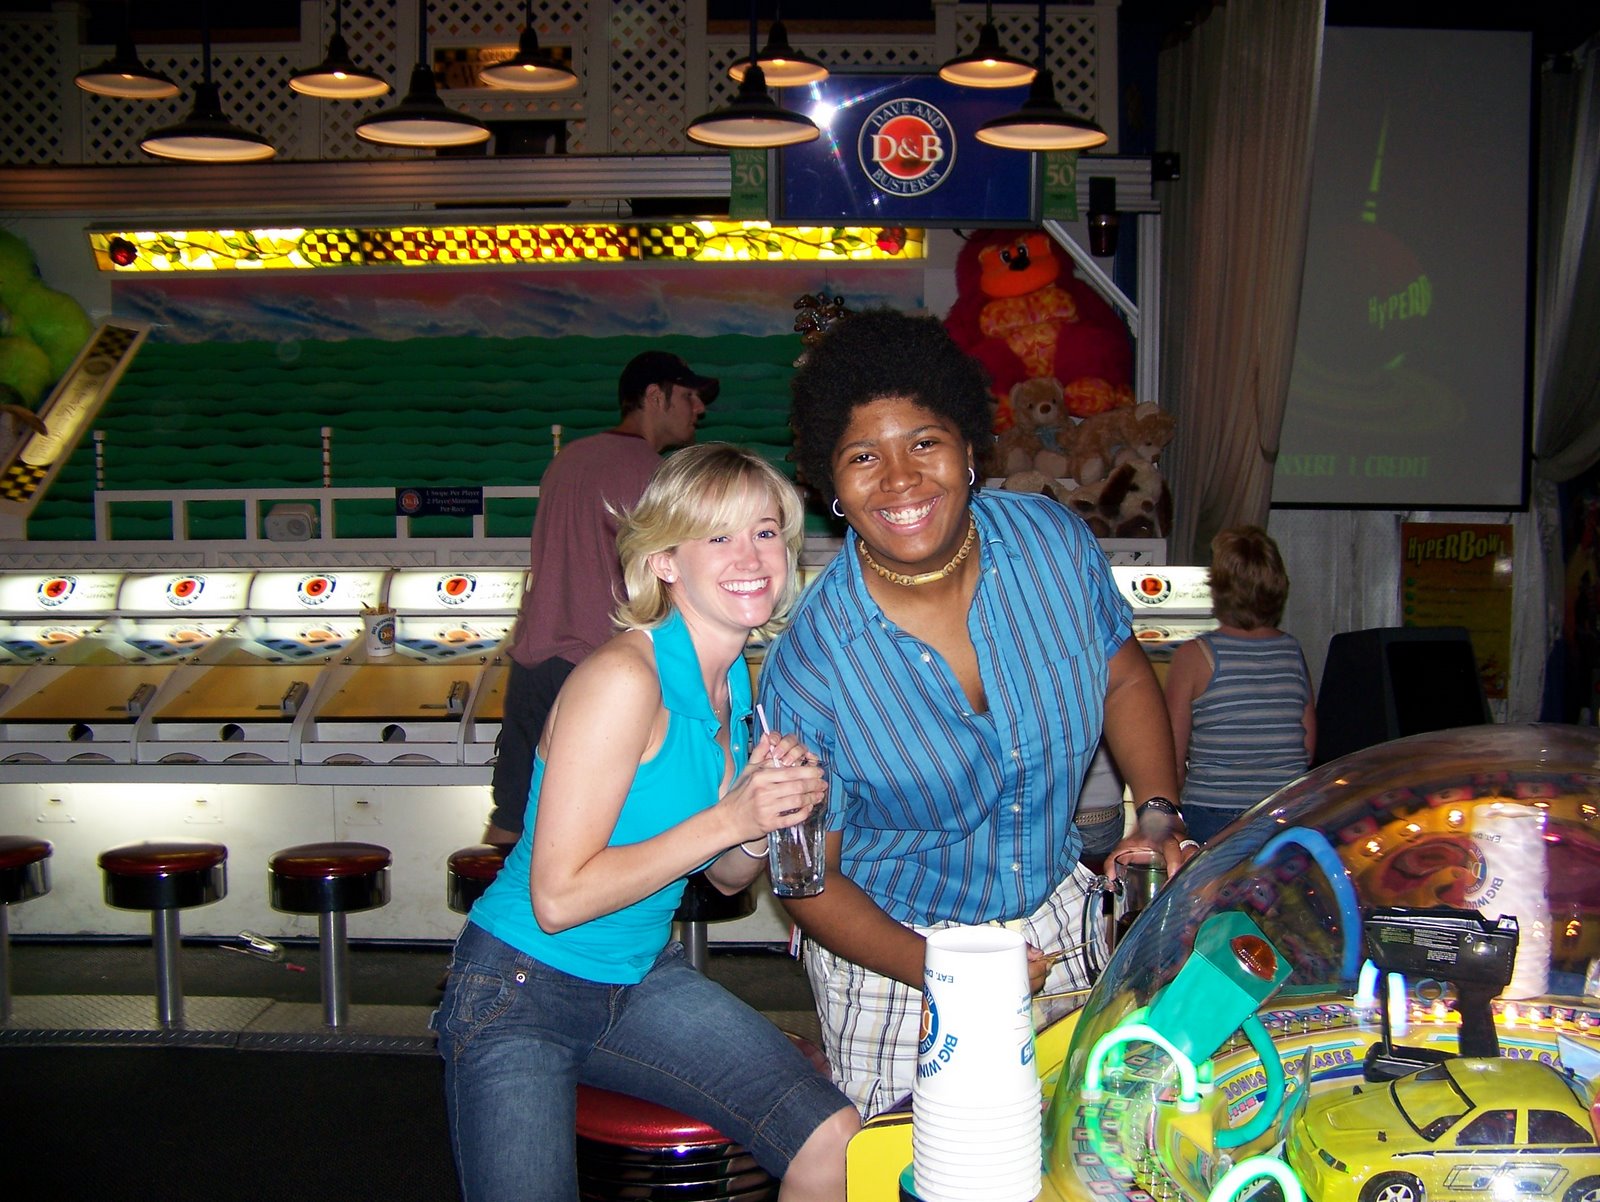 [Dave+and+Busters+033.jpg]